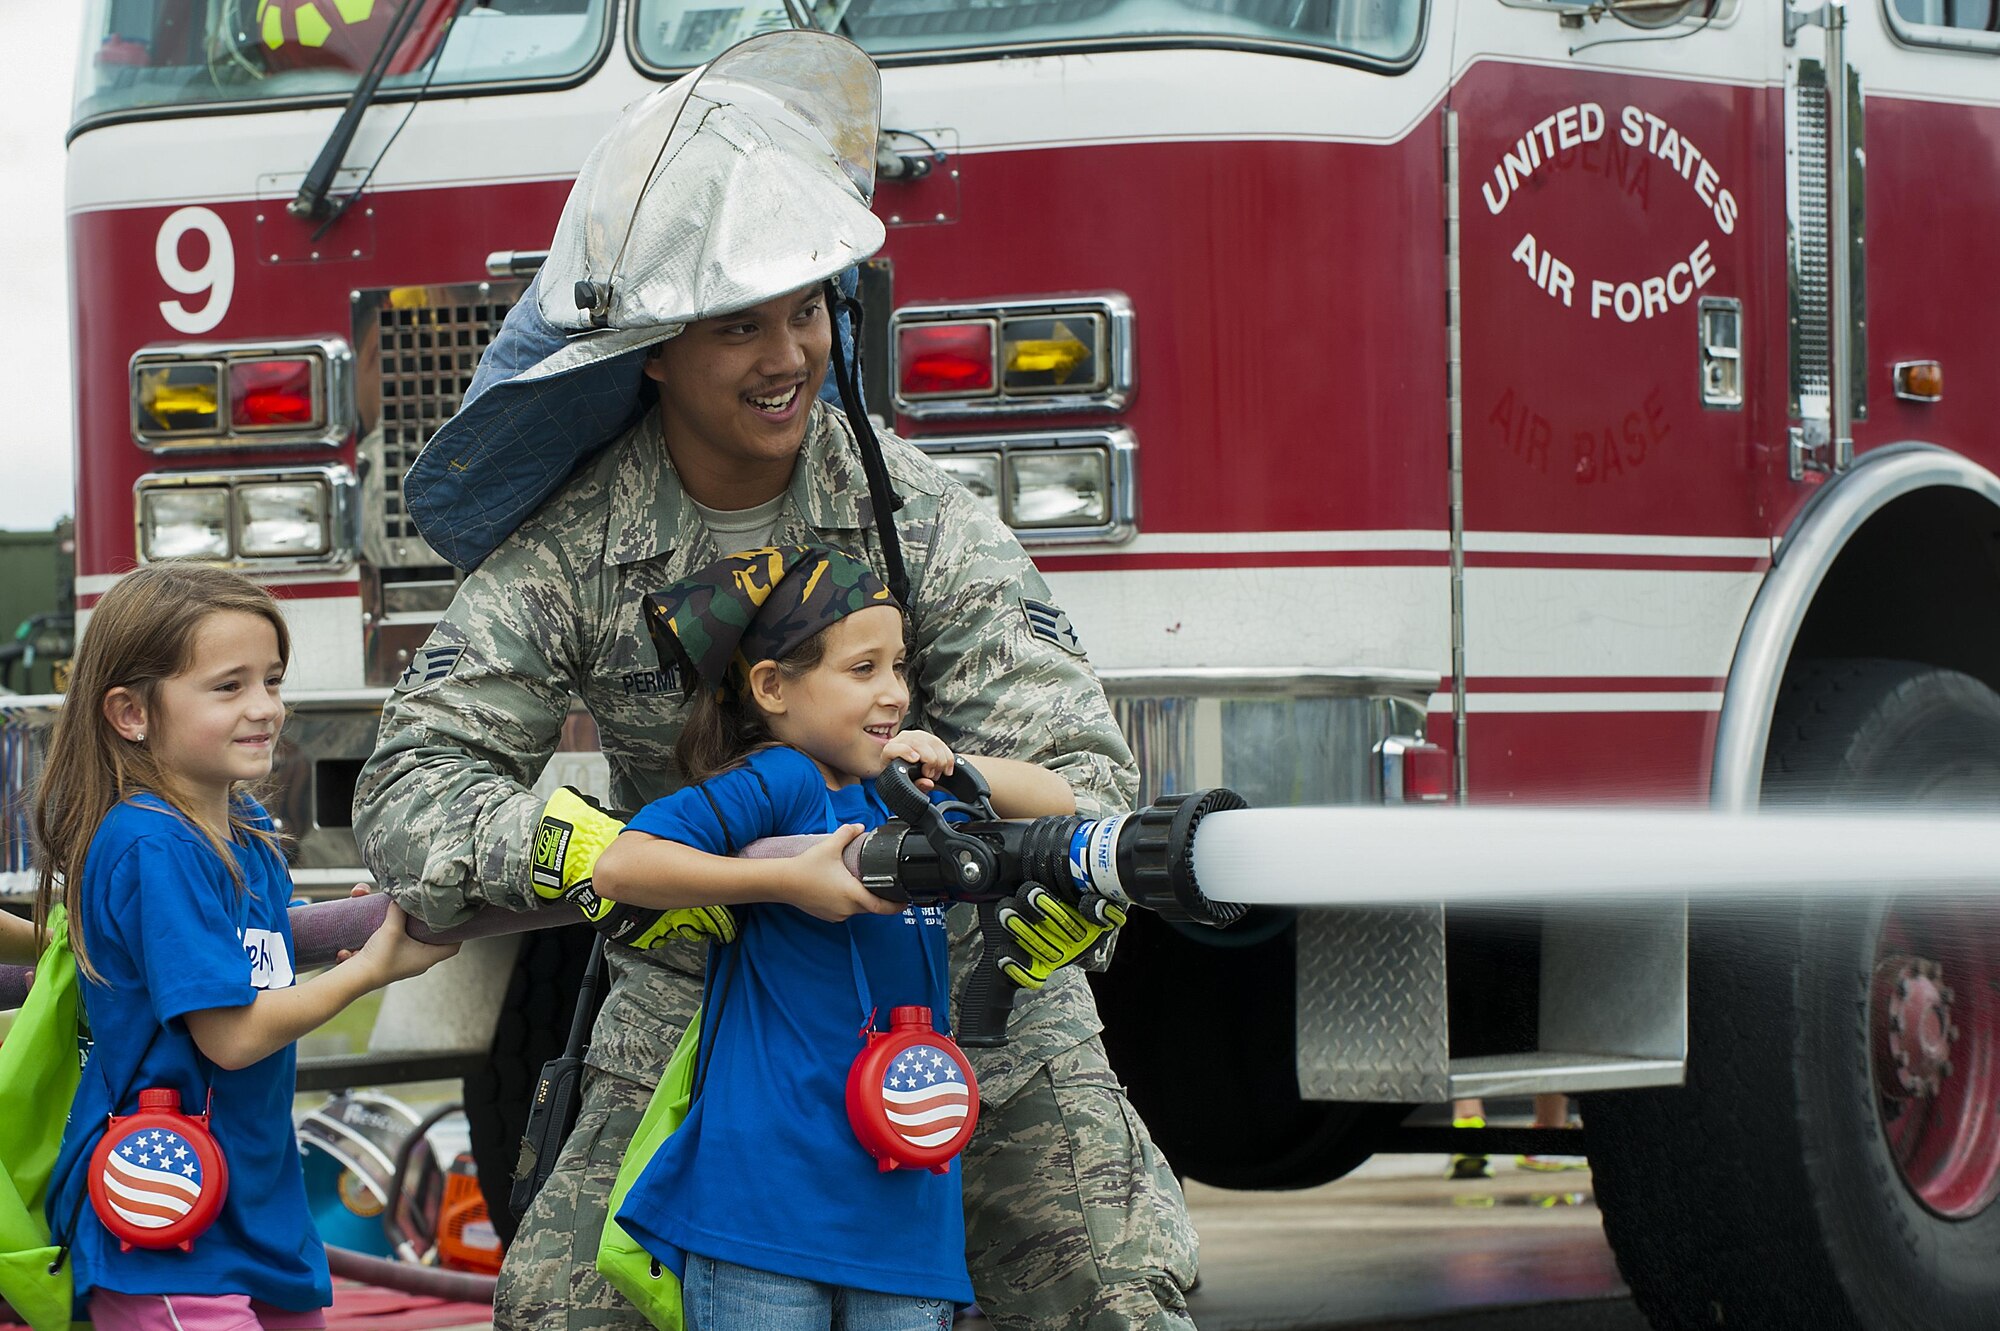 U.S. Air Force Senior Airman James Permito, 18th Civil Engineer Squadron firefighter, holds the water hose steady as children shoot at cones during Skoshi Warrior Nov. 14, 2015, at Kadena Air Base, Japan. Skoshi Warrior is an annual event for military children and provides a fun environment for children to experience the deployment process their parents go through when tasked to deploy. (U.S. Air Force photo by Airman 1st Class Corey M. Pettis/Released)